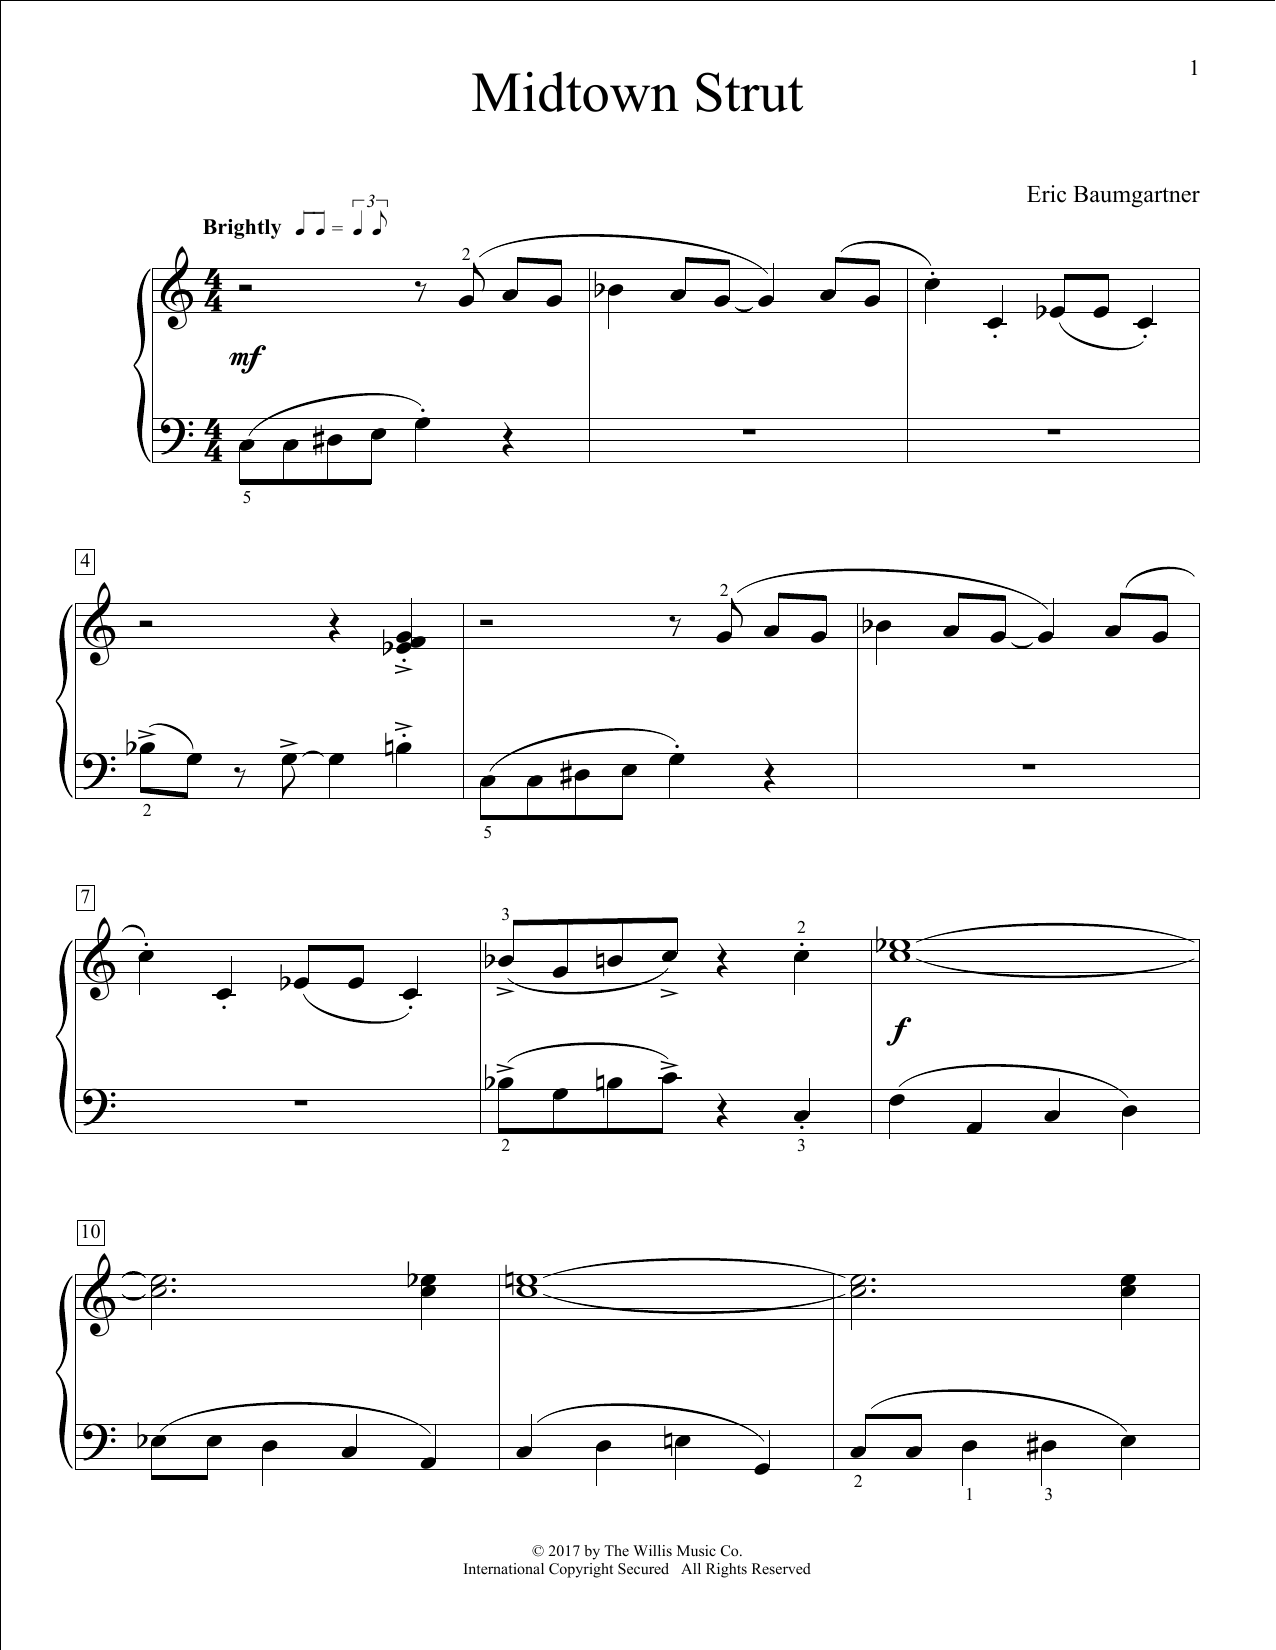 Eric Baumgartner Midtown Strut sheet music preview music notes and score for Educational Piano including 2 page(s)